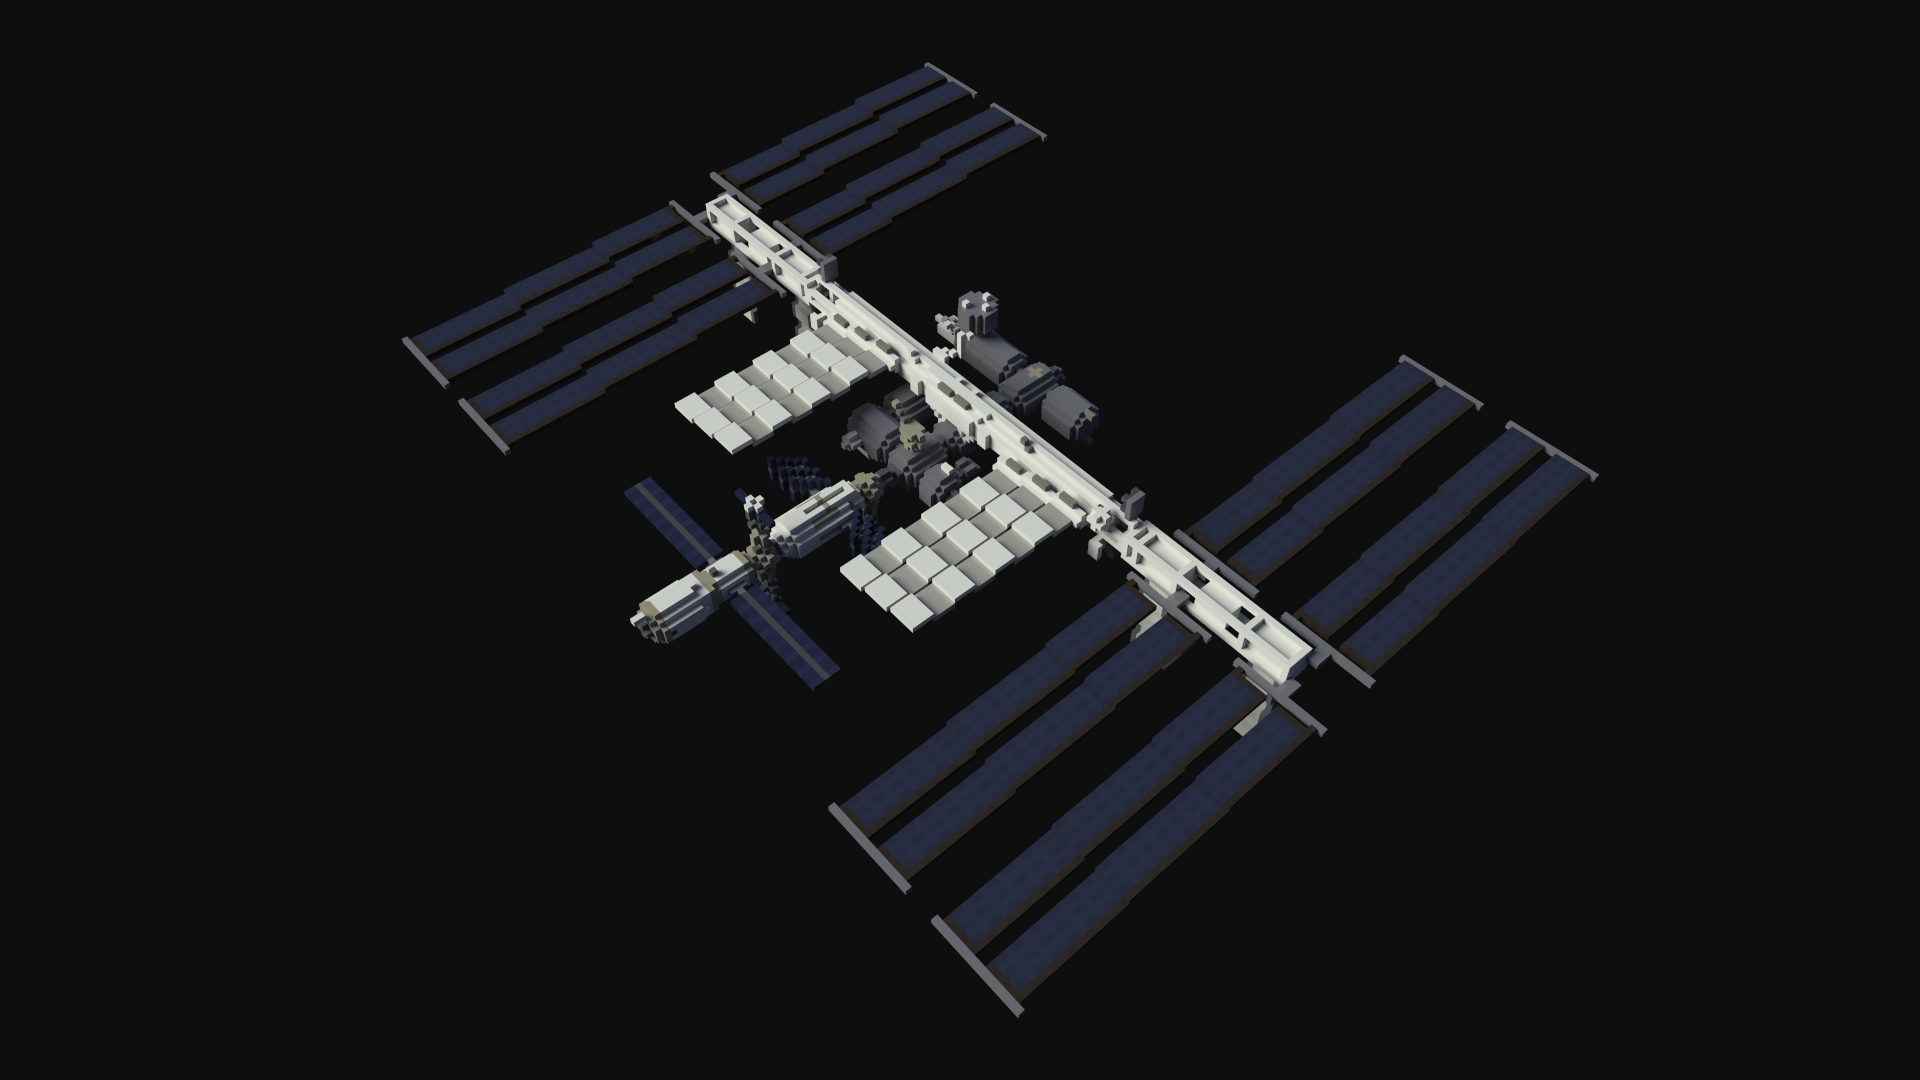 ISS Voxel Art